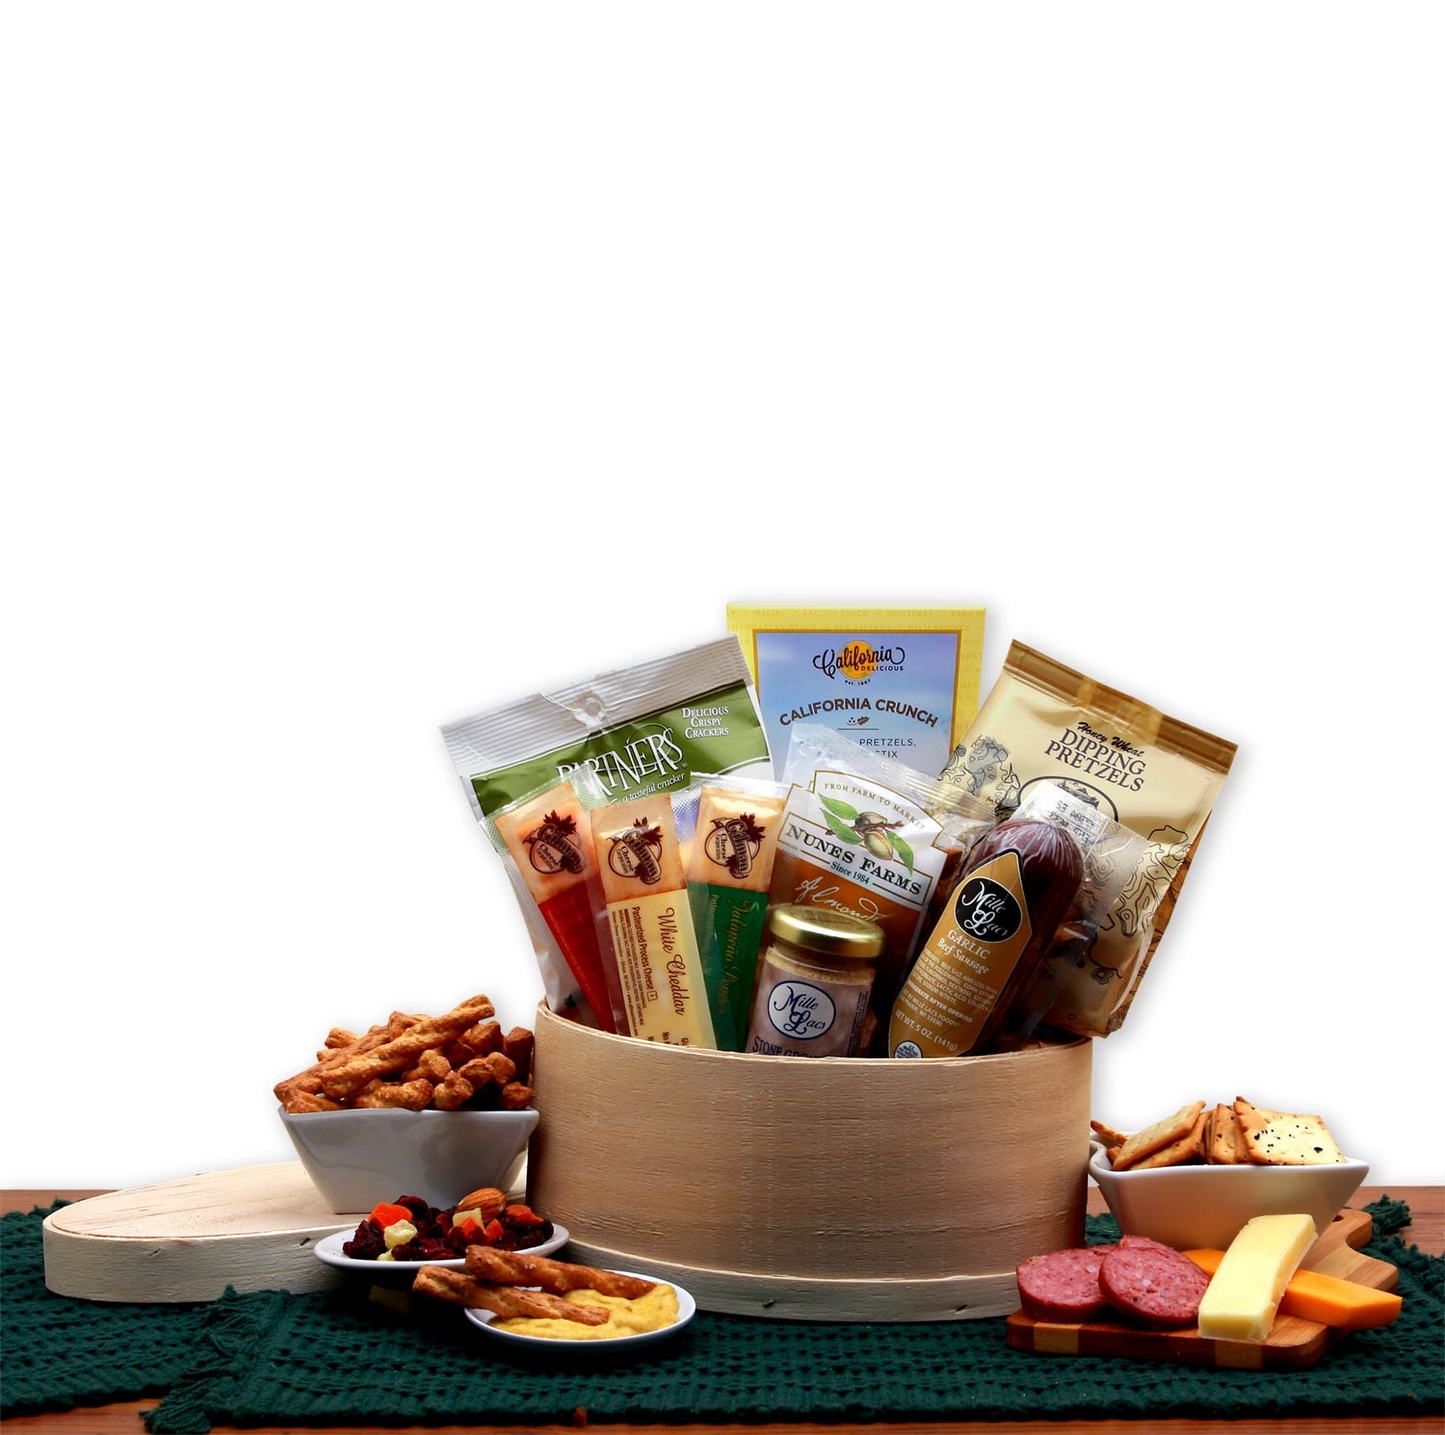 Savory Snacks Gift Box - Delicious Assortment of Meat and Cheese